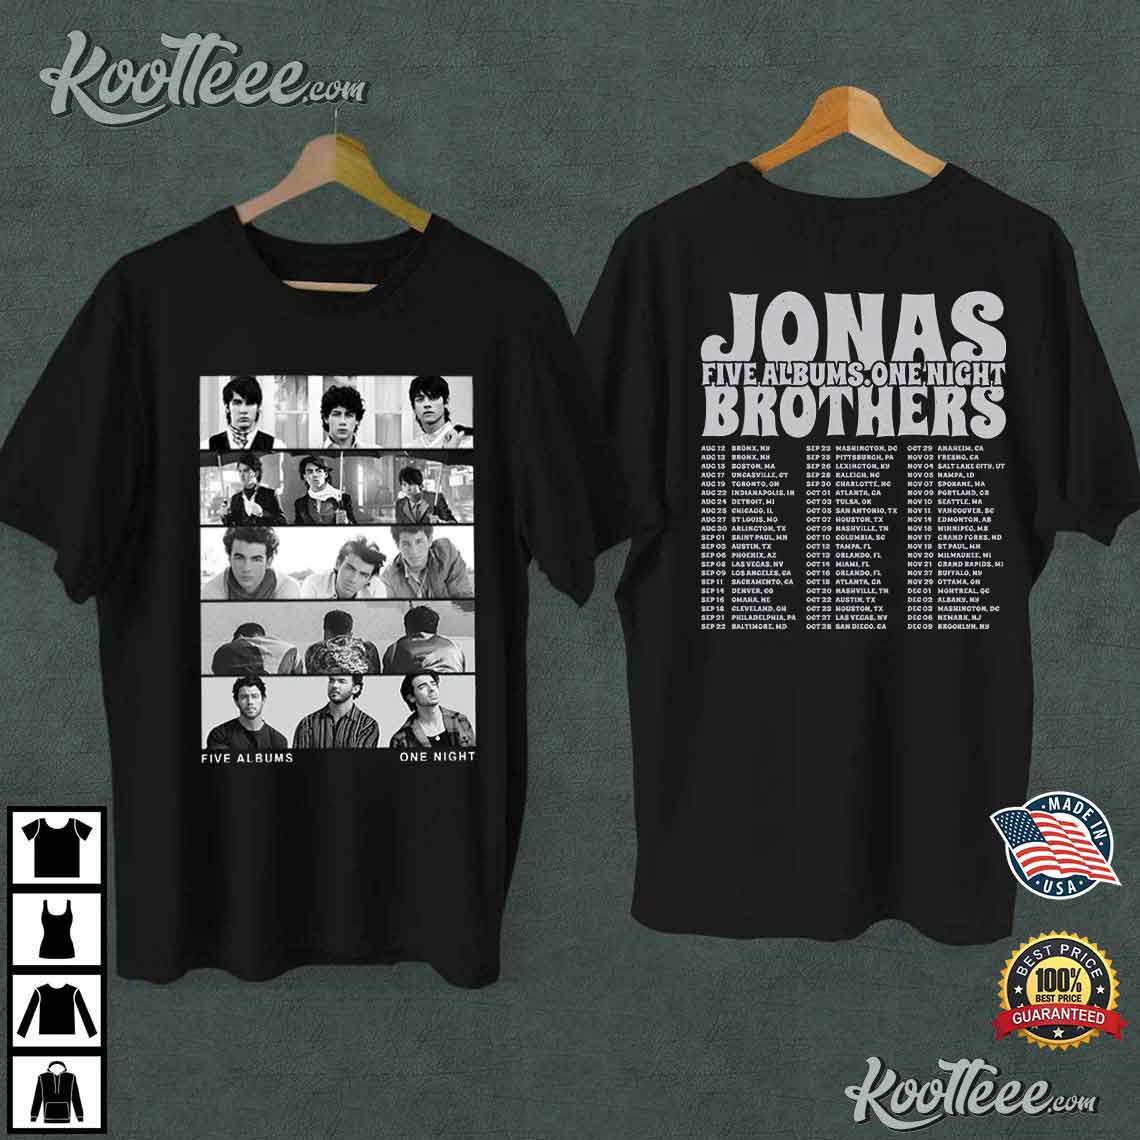 Jonas Brothers Five Albums One Night Tour T-Shirt